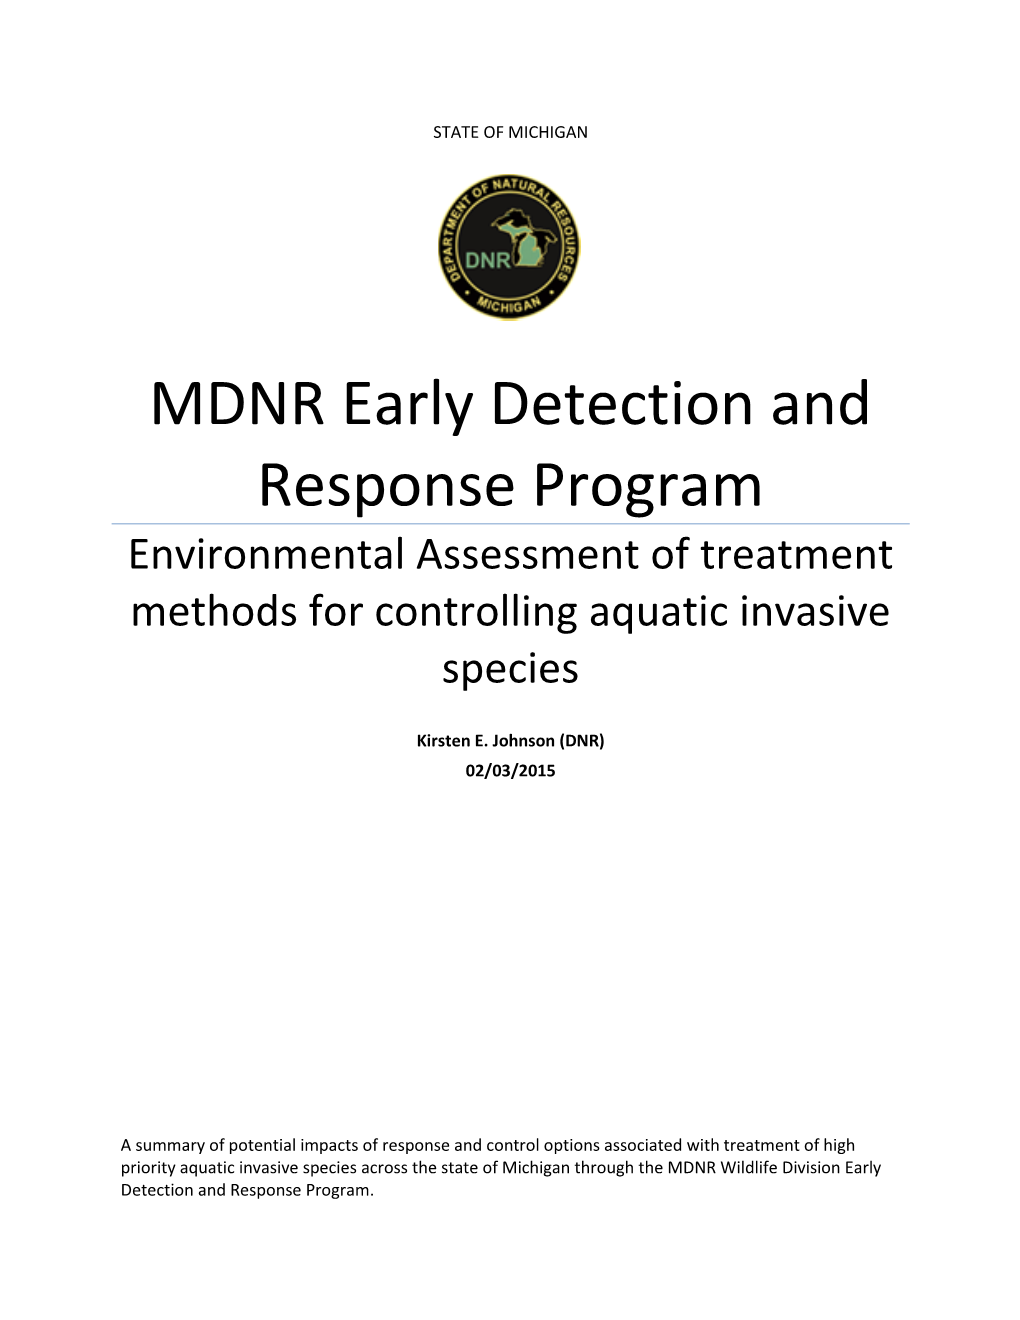 Michigan DNR Early Detection and Response